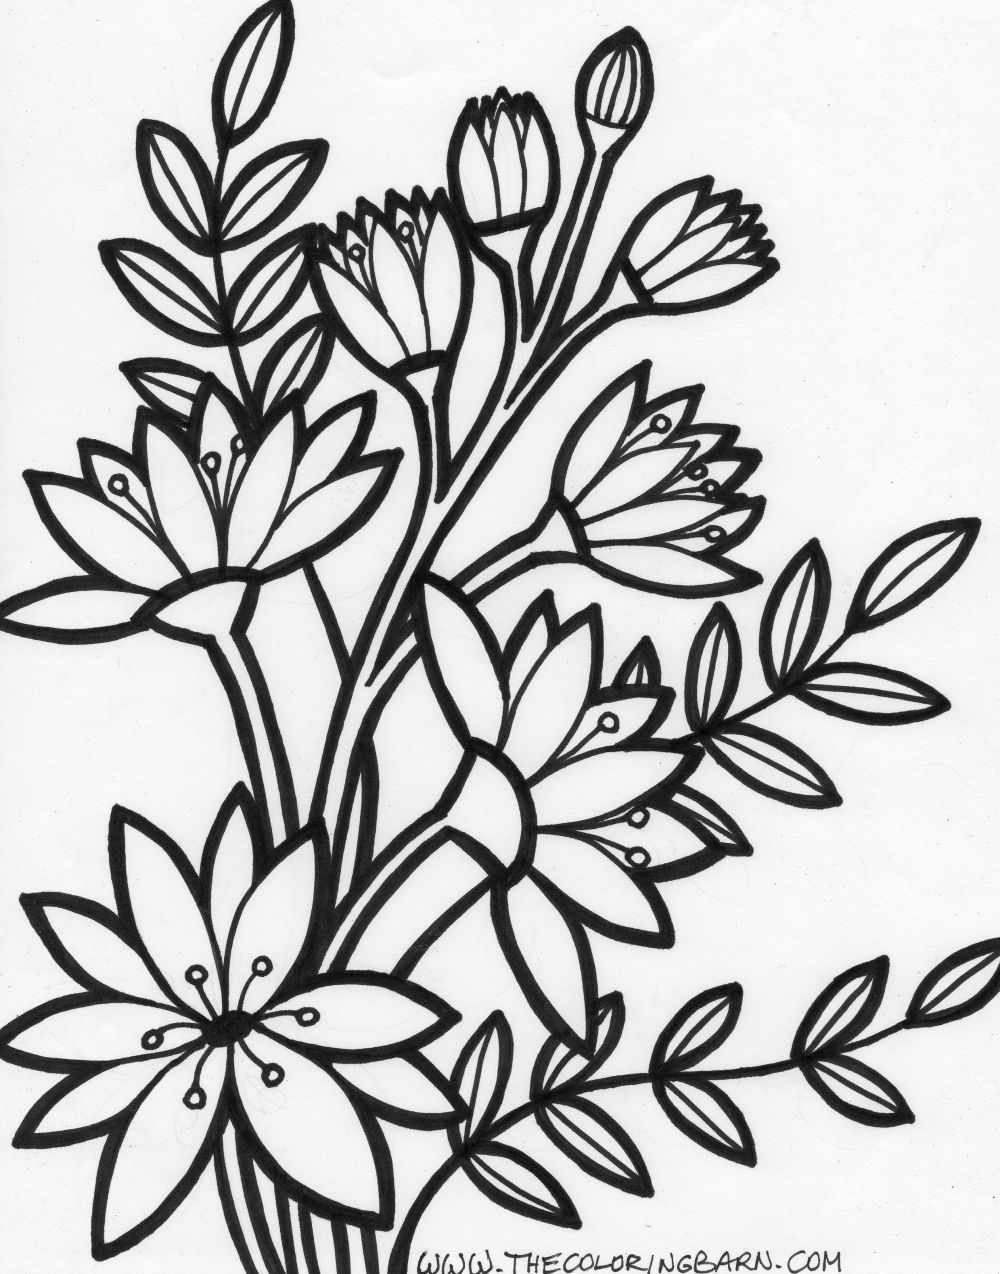  Flowers coloring pages | color printing | Flower | Coloring pages free | #52